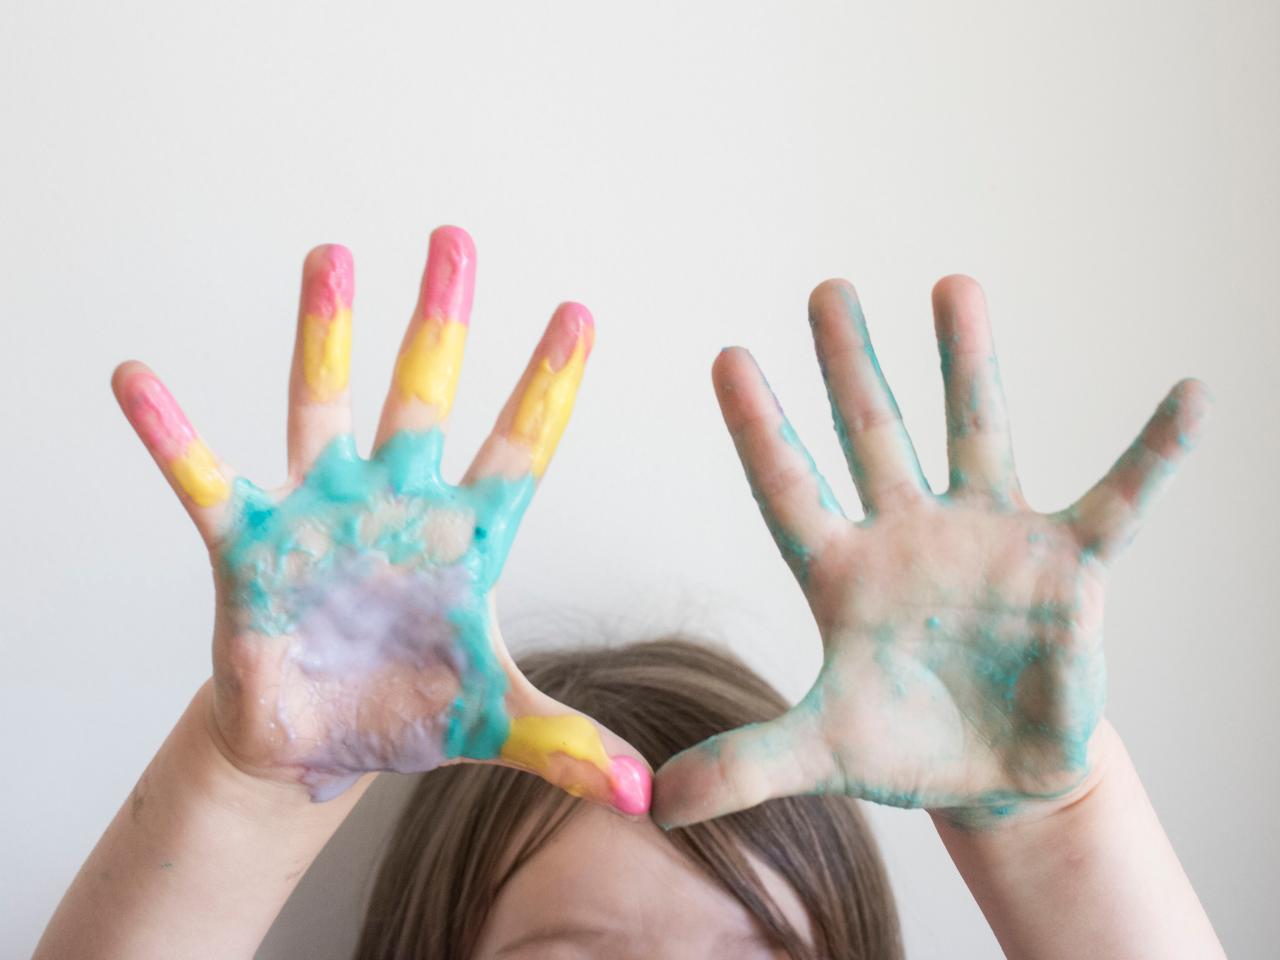 How To Make Your Own Non-toxic Paint From Easy Nature Finds - Wild